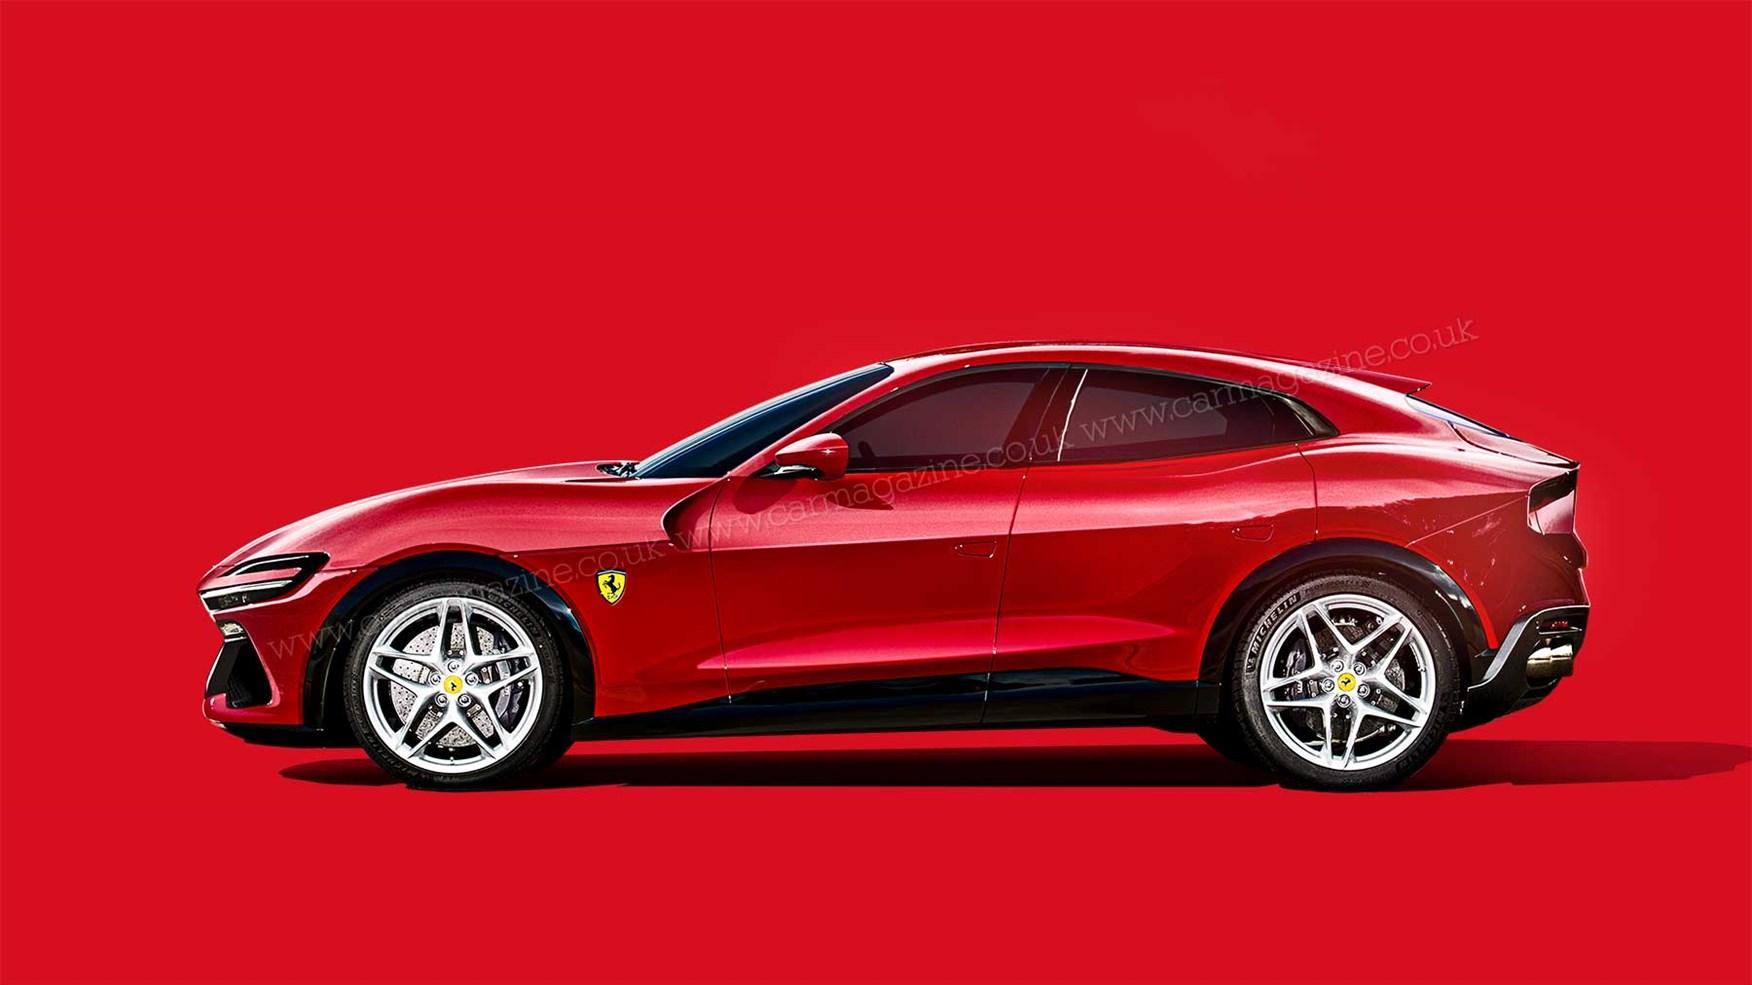 Ferrari Purosangue To Arrive In September With V12 Power And